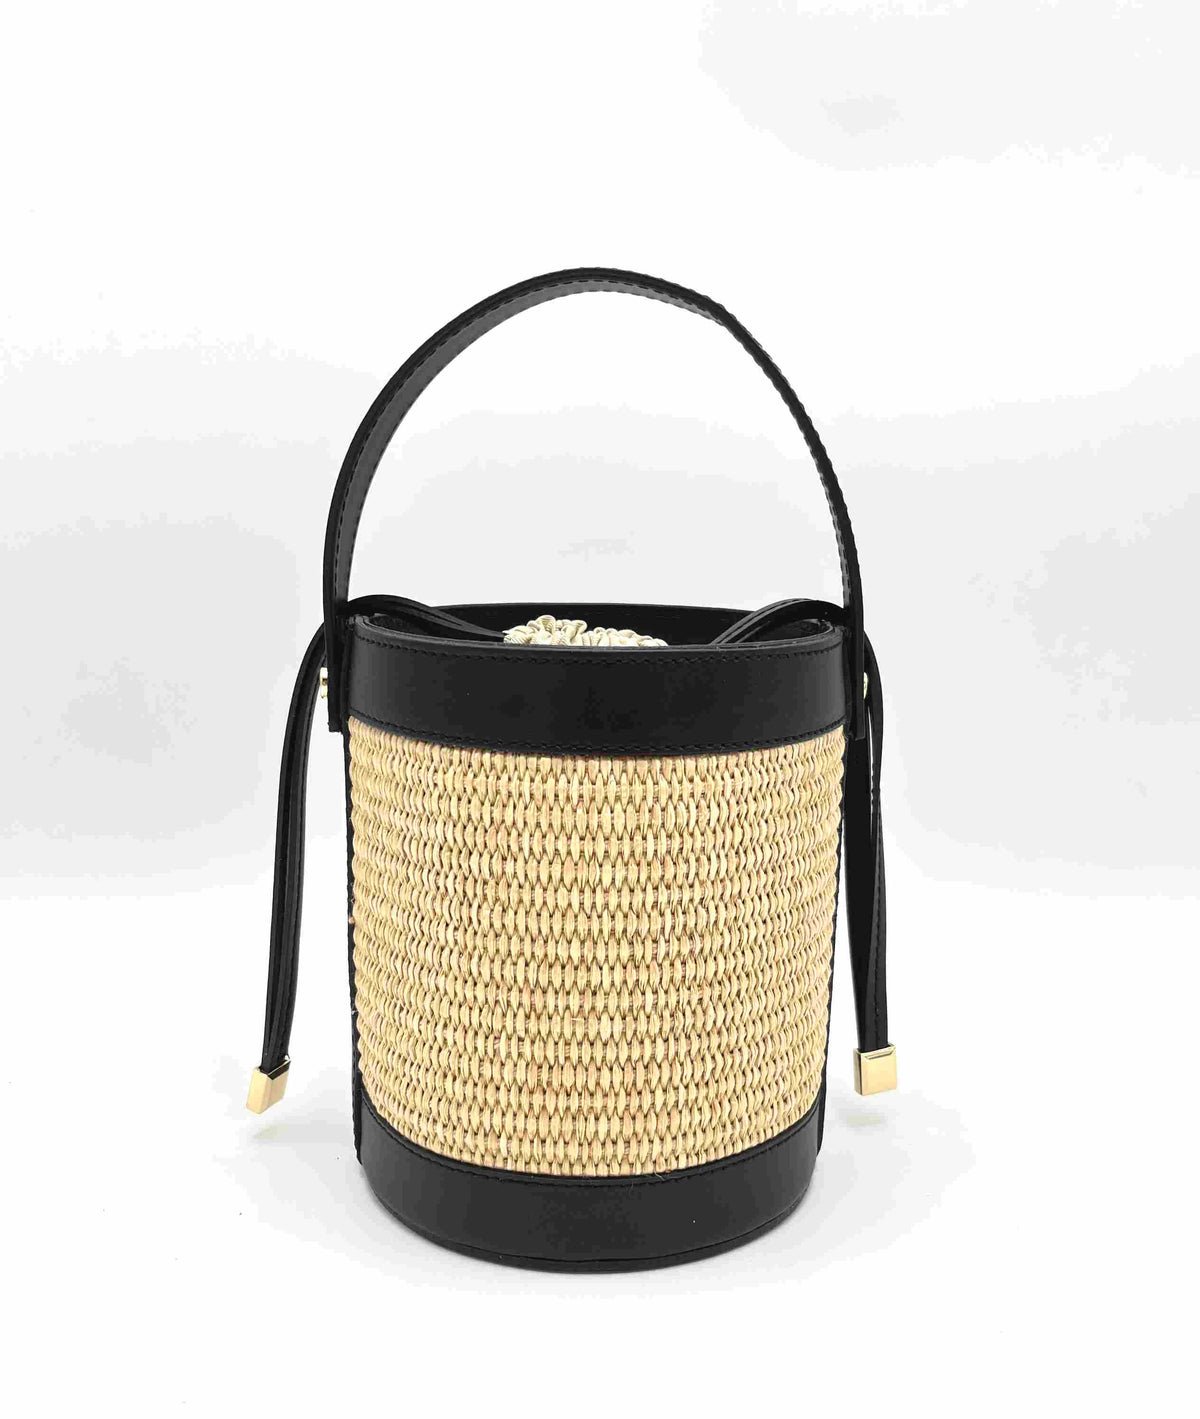 Leather and Straw bucket bag, Made in Italy, small, art. 112409.412